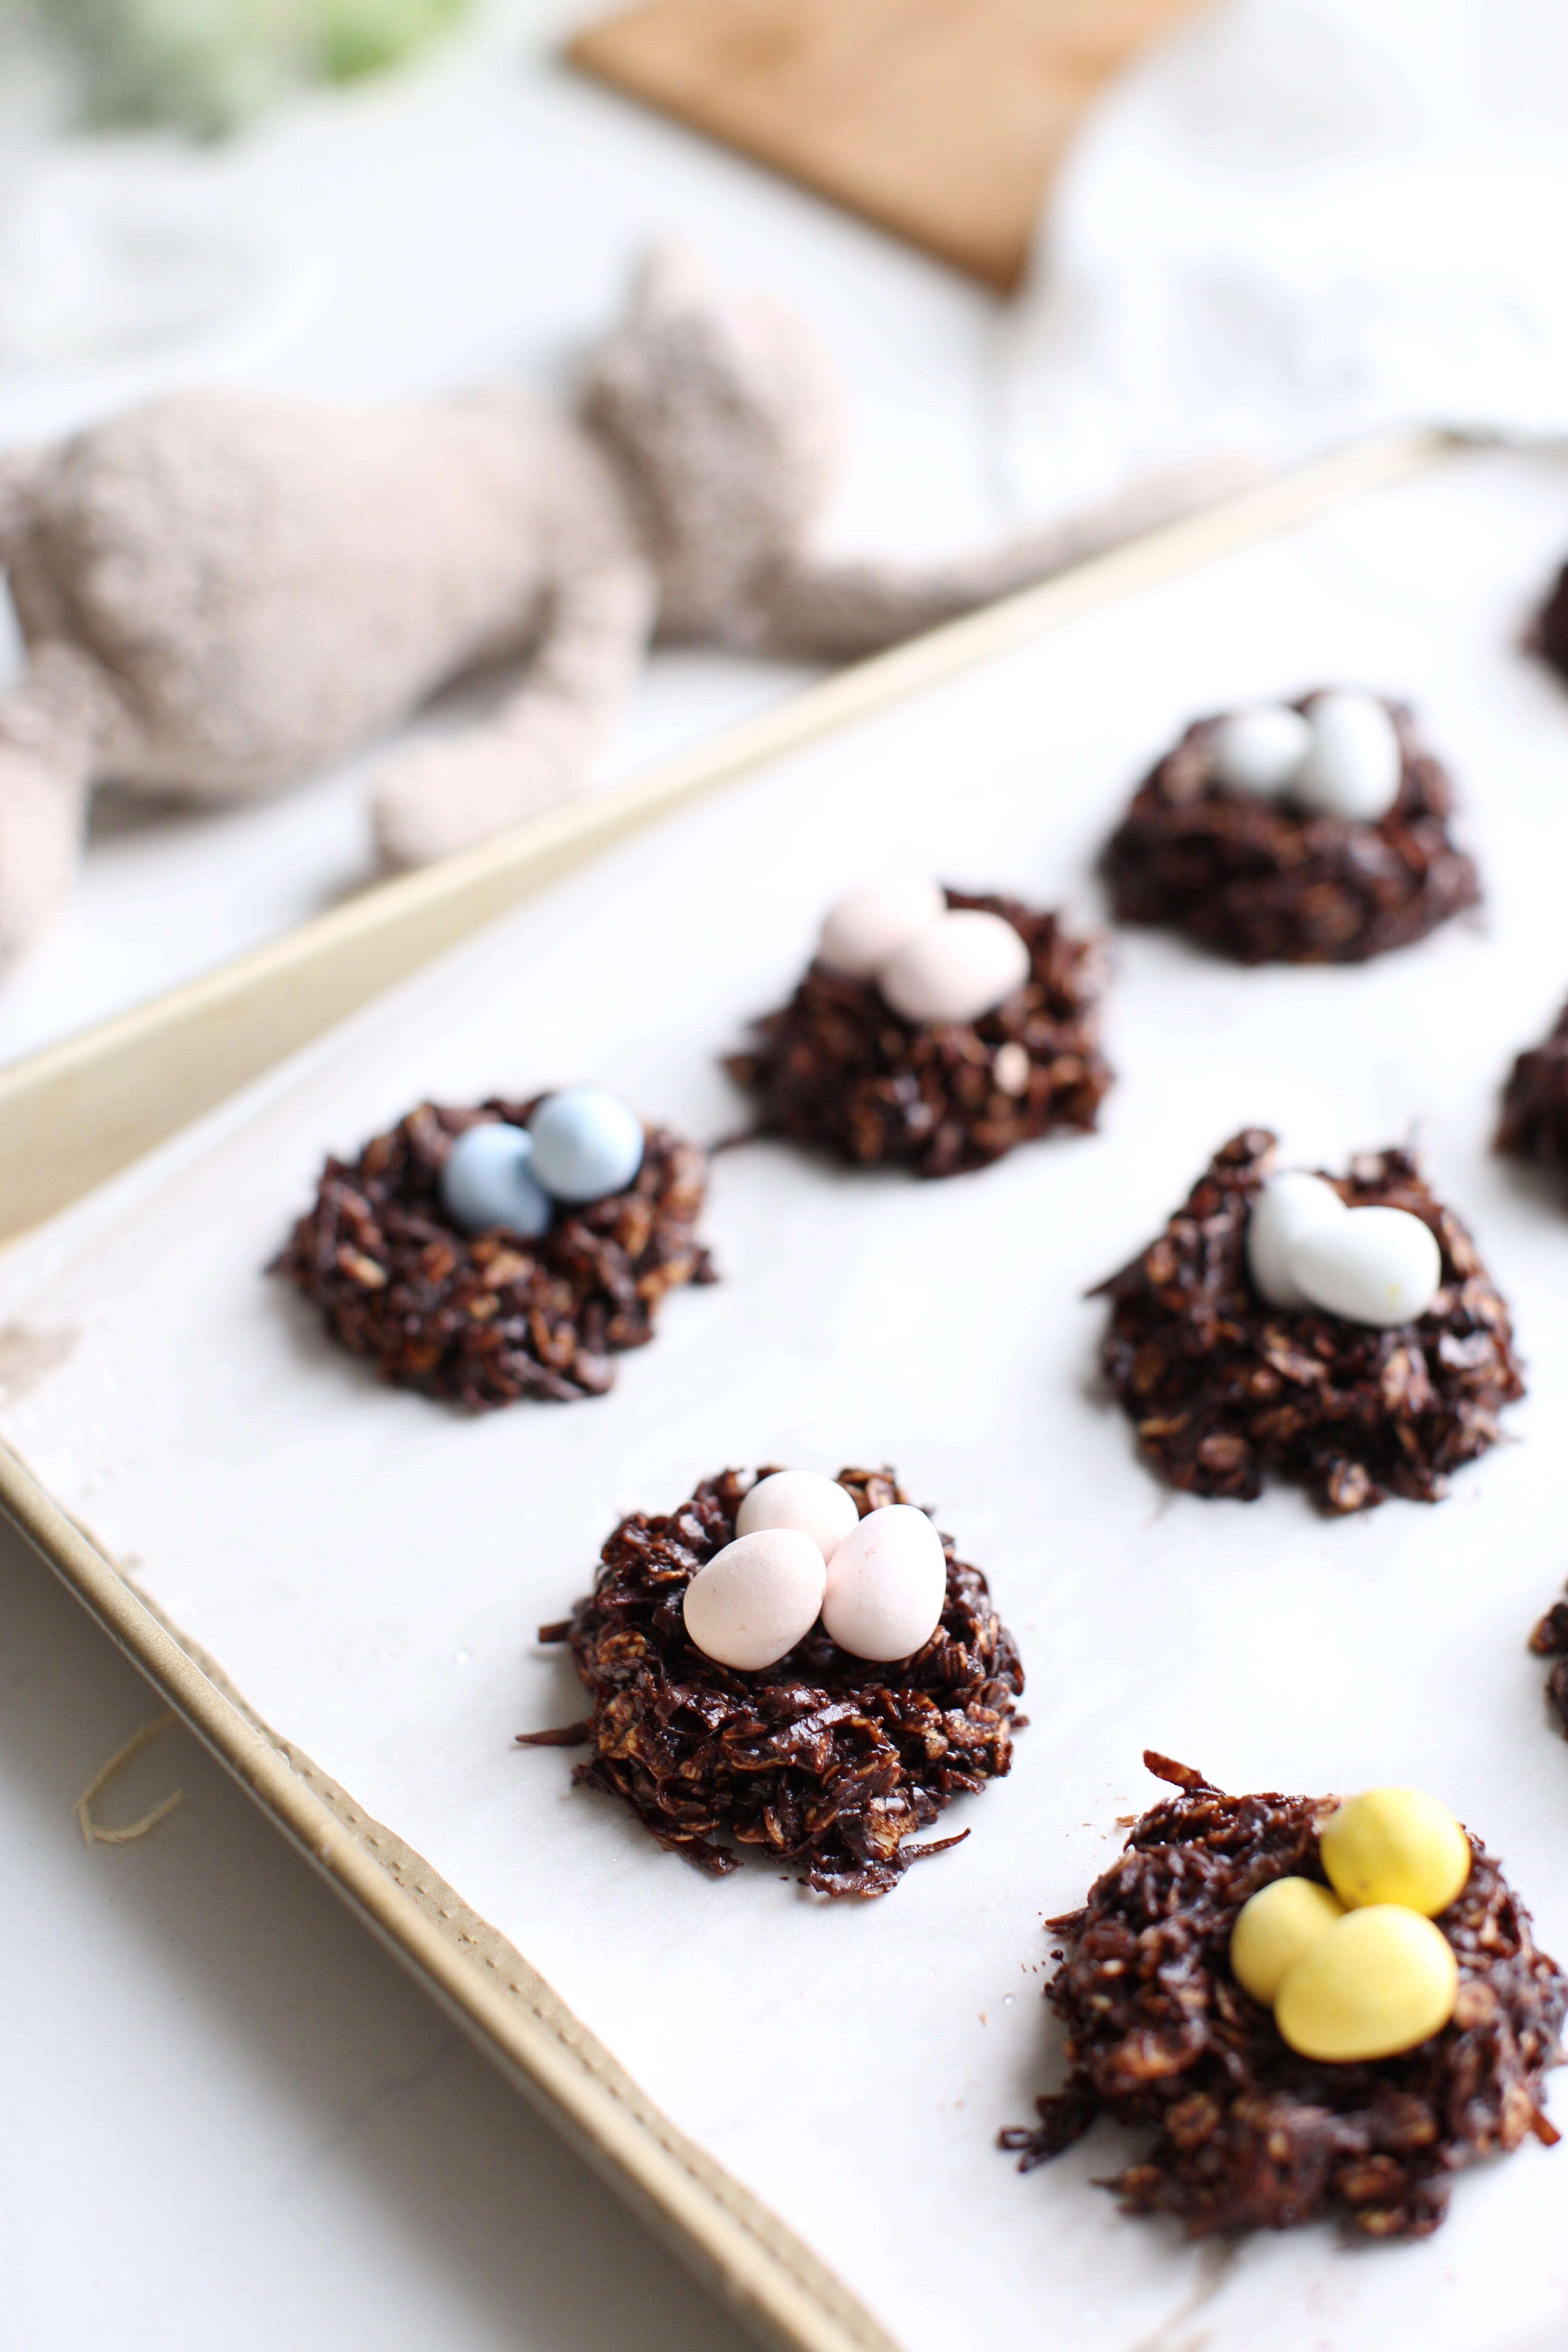 Healthy Chocolate Haystack Cookies that are naturally sweetened, vegan and gluten free. They also make adorable 'nests' for mini chocolate eggs for Easter!